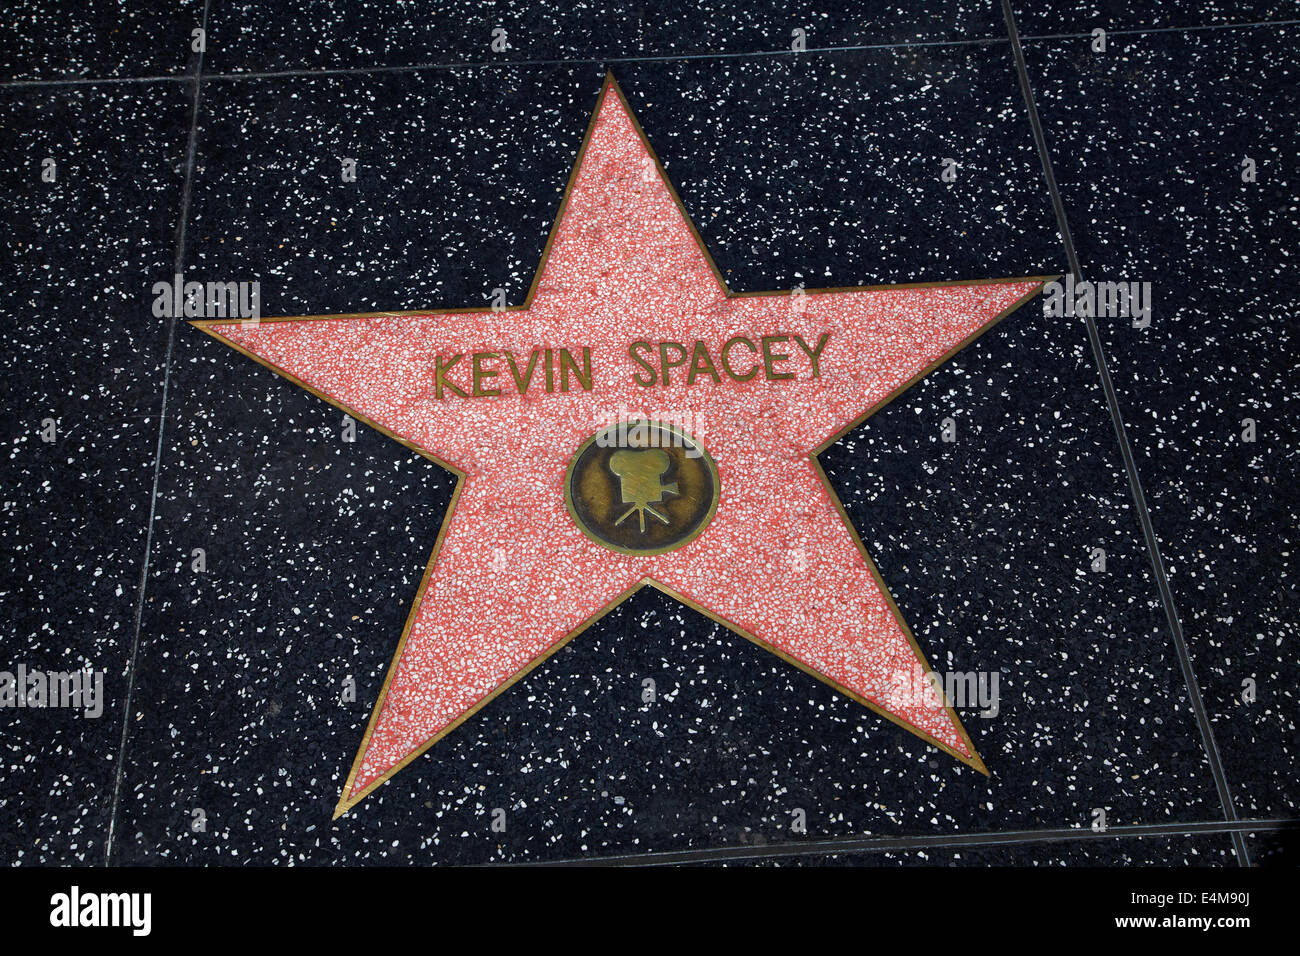 Kevin Spacey Stern am Hollywood Walk of Fame, Hollywood Boulevard, Hollywood, Los Angeles, Kalifornien, USA Stockfoto